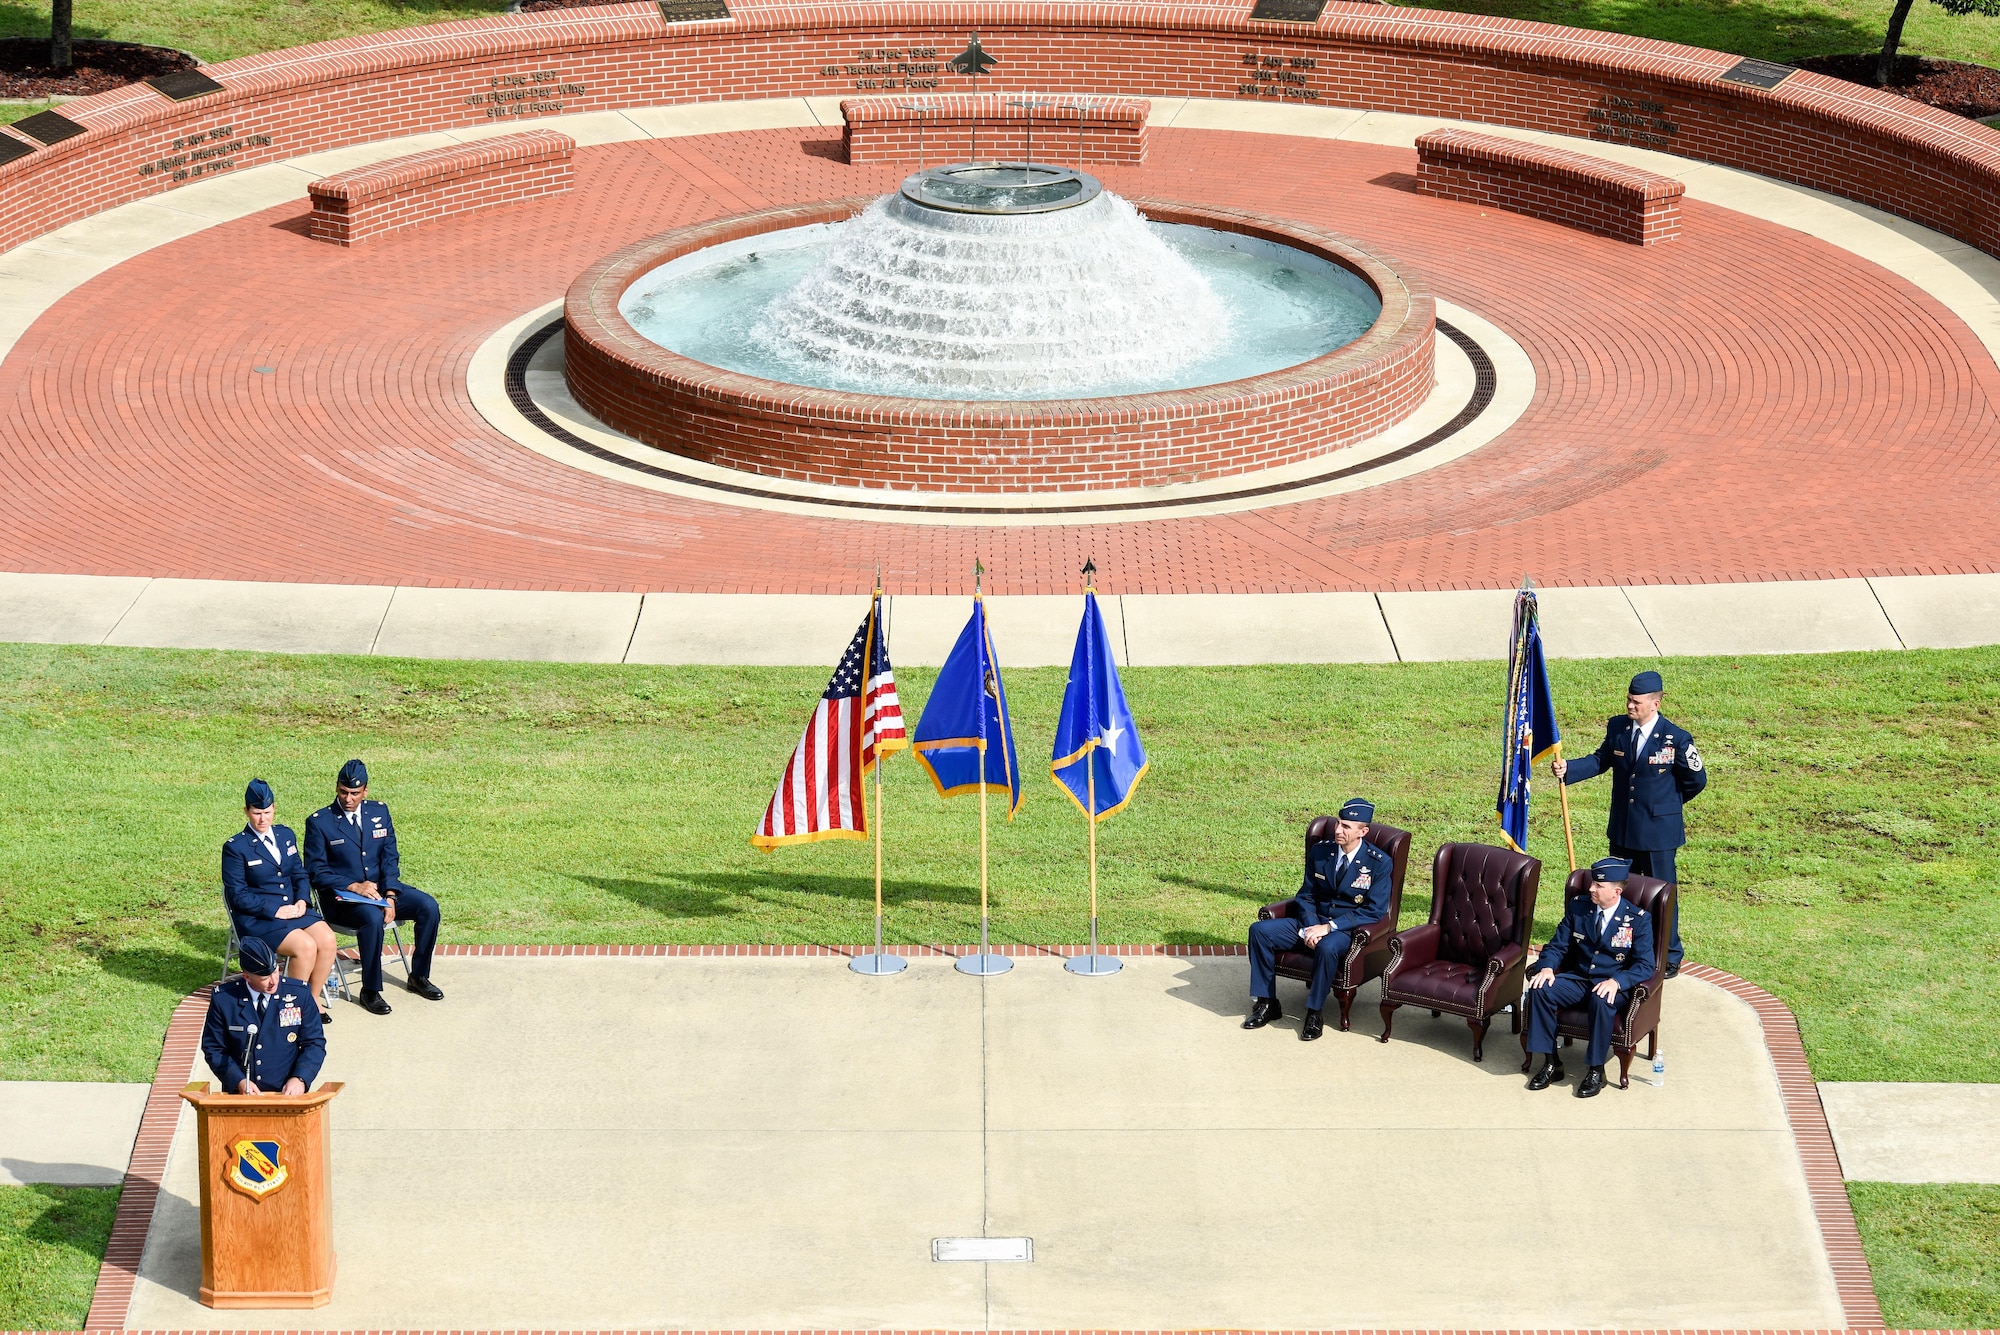 Col. Mark Slocum, outgoing 4th Fighter Wing commander, speaks to Airmen during the 4th Fighter Wing change of command ceremony, June 30, 2016, at Seymour Johnson Air Force Base, North Carolina. Slocum relinquished command to Col. Christopher Sage, who has served at Seymour Johnson AFB on two previous assignments. (U.S. Air Force photo by Airman Shawna L. Keyes/Released)